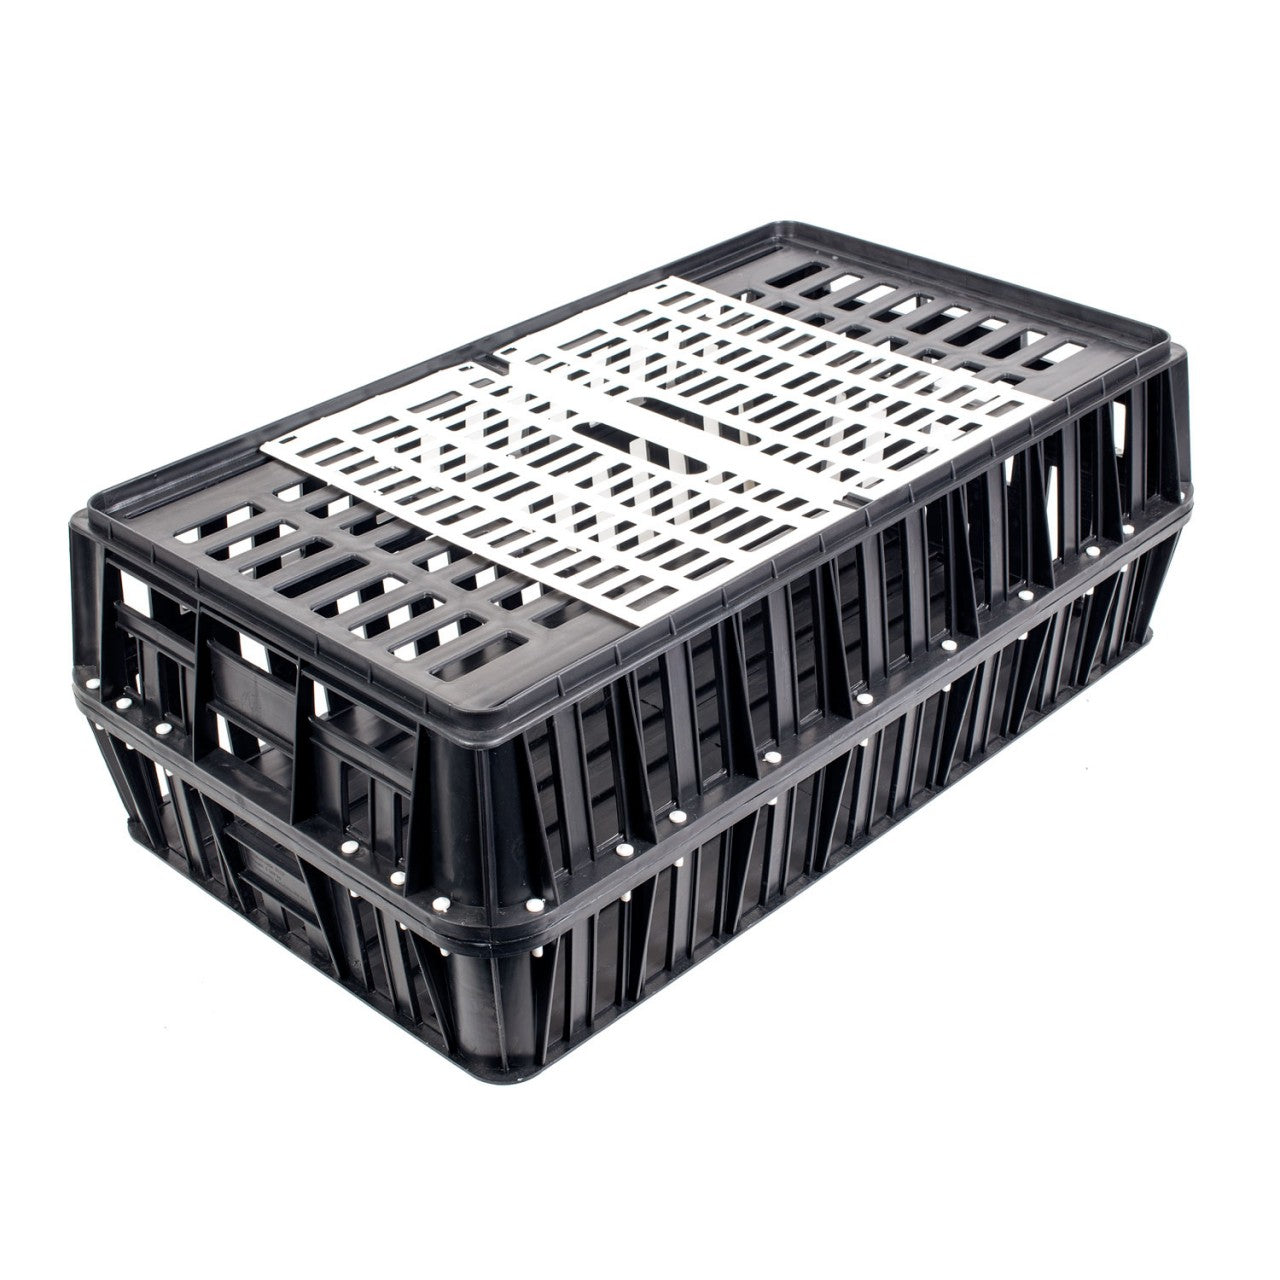 Carrier Box for Poultry, closed Bottom, black - 30cm high